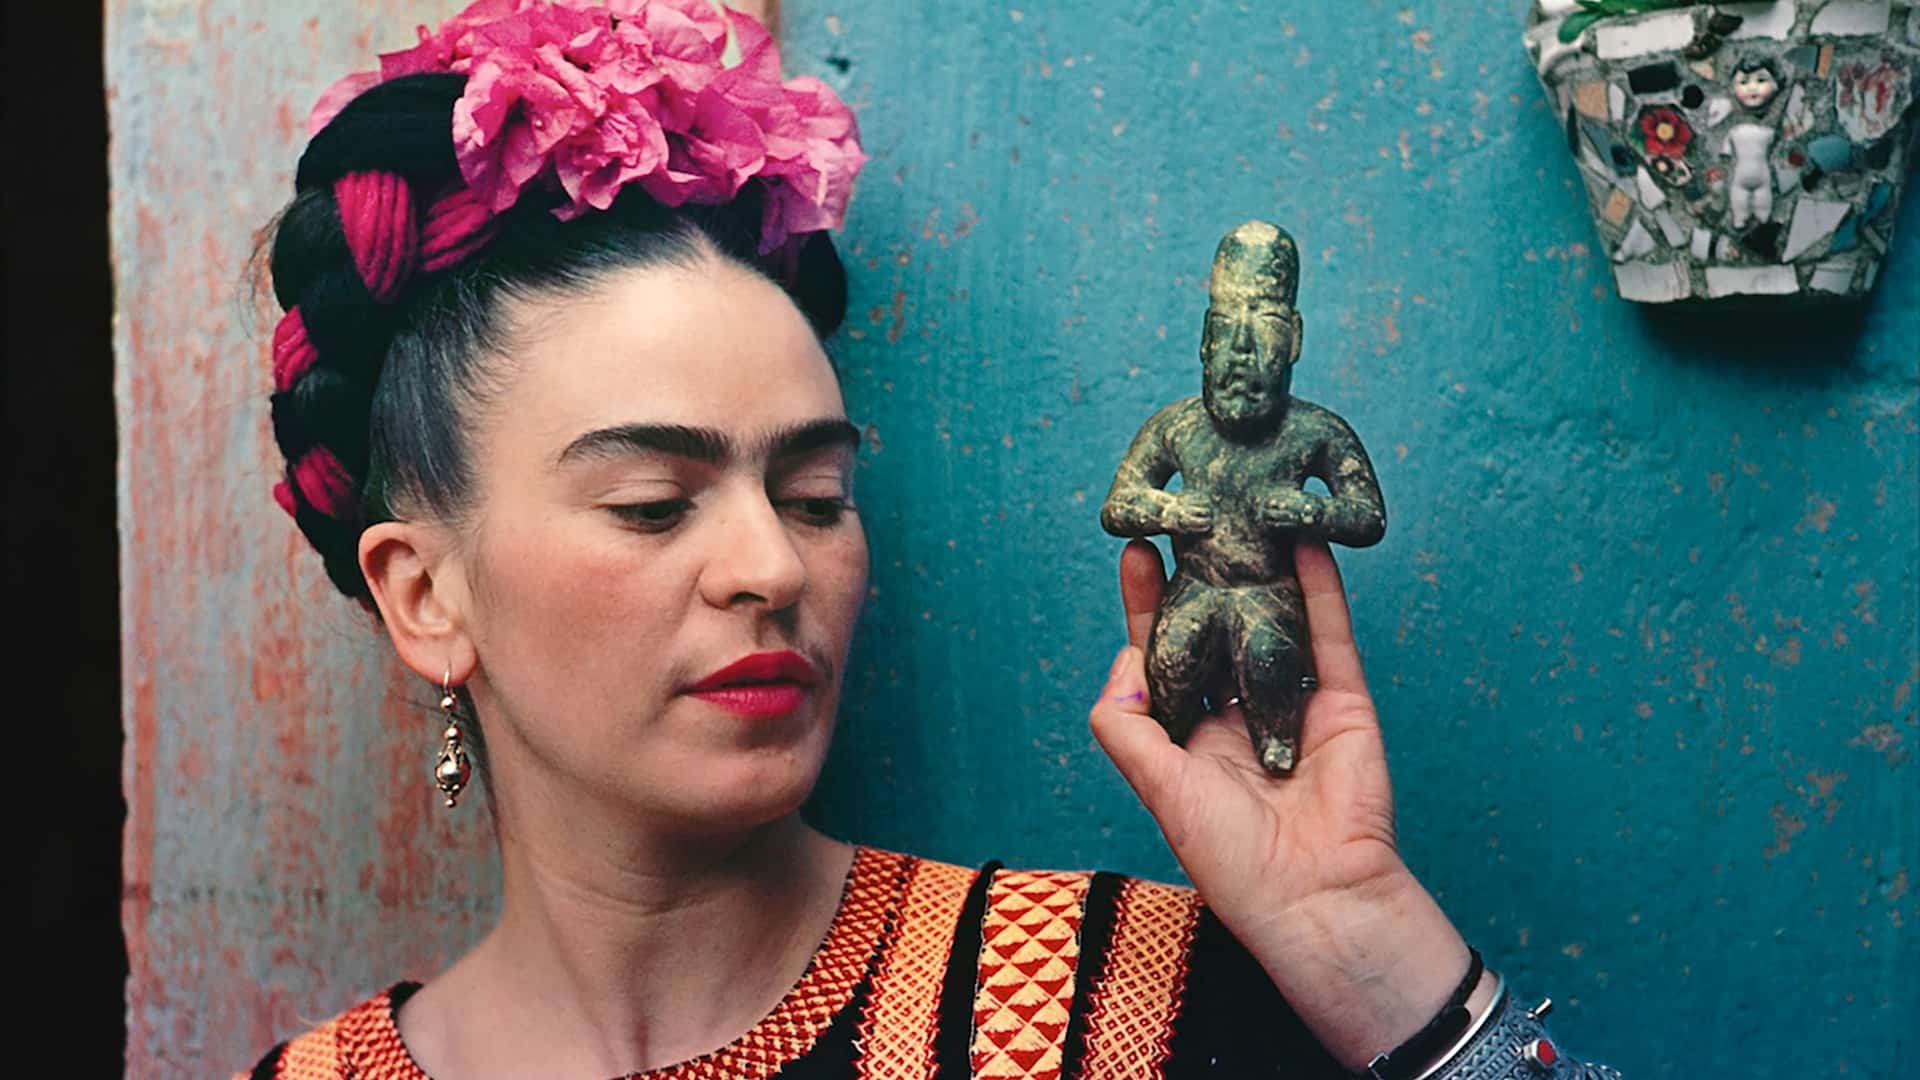 A woman holding up an object in front of her face - Frida Kahlo